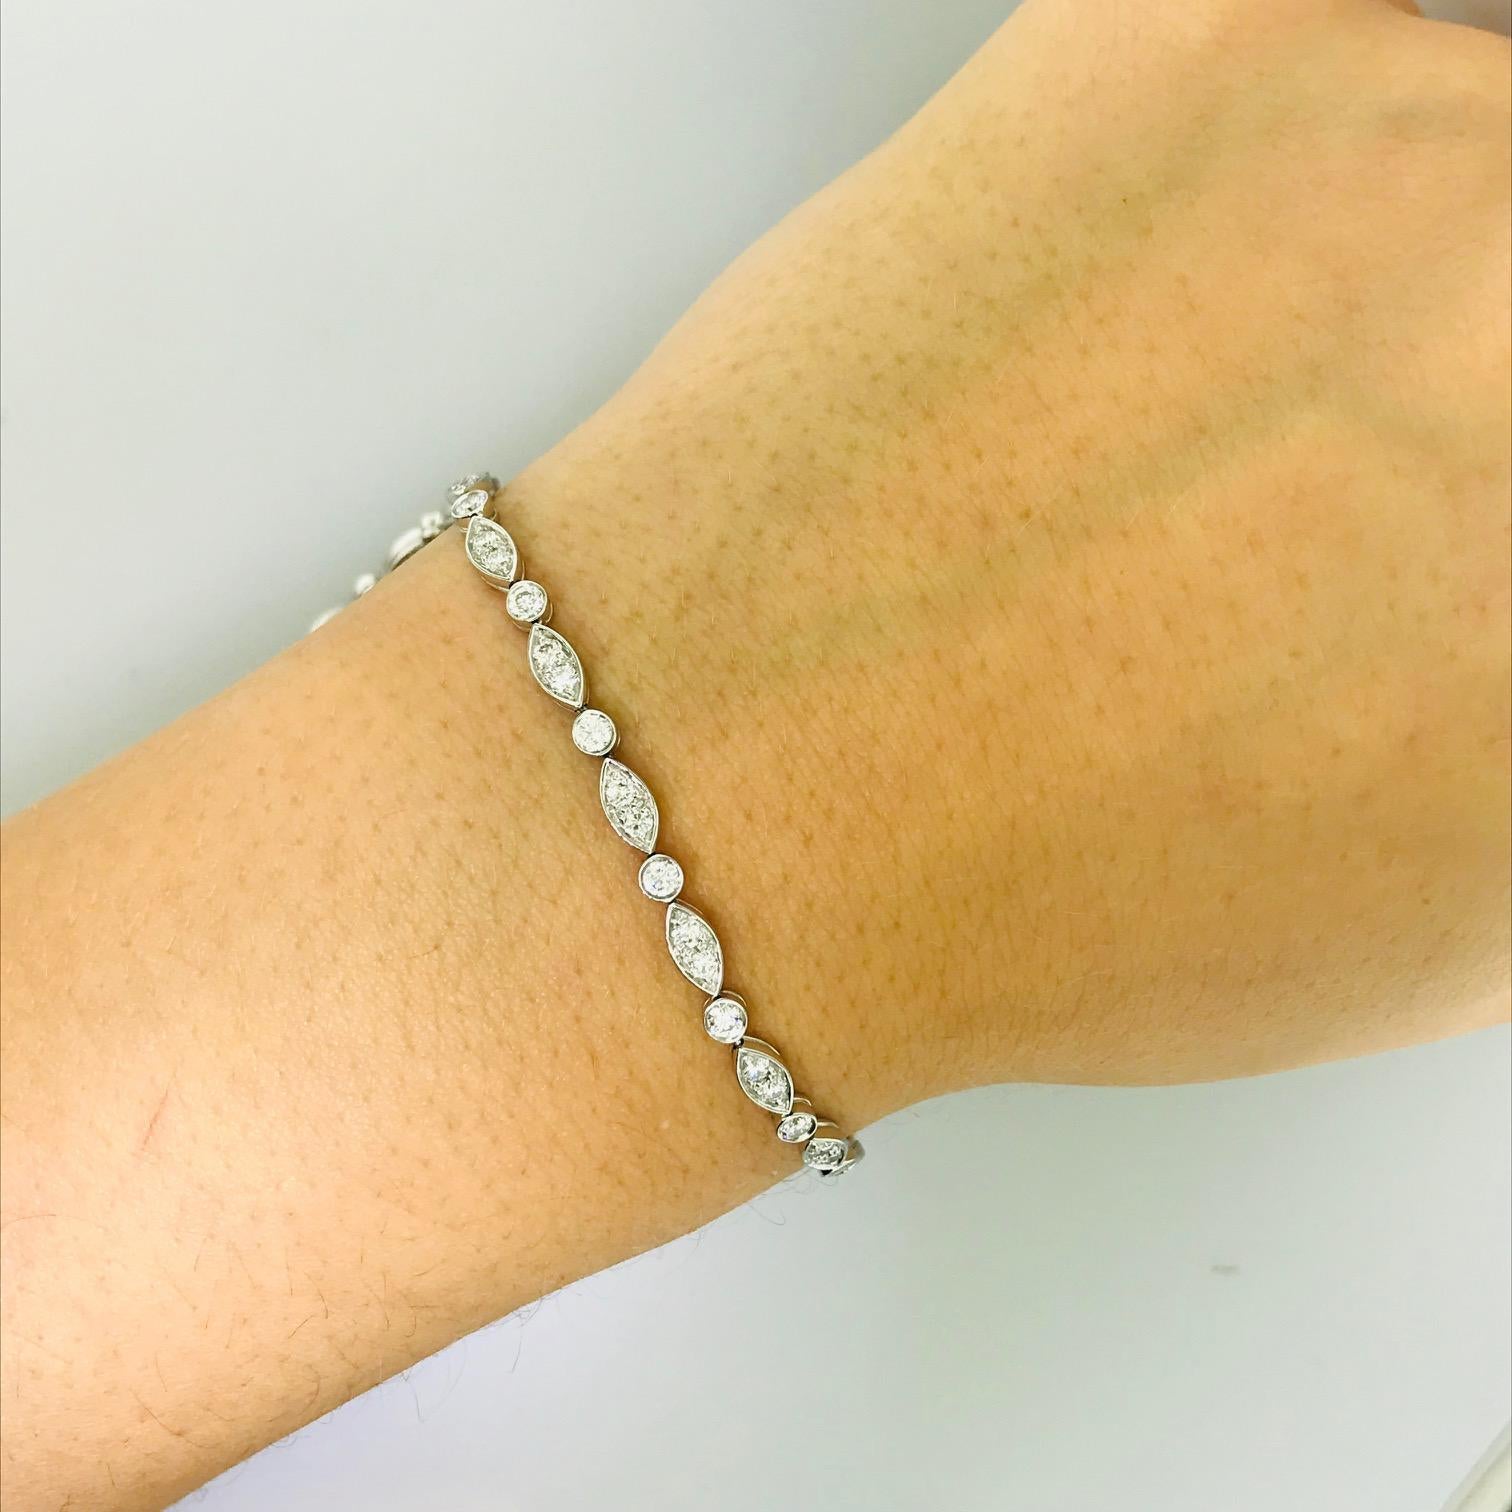 The Tiffany & Co. Platinum Diamond Jazz Bracelet is an original Tiffany and Company piece. The diamond Jazz bracelet is a modern design tennis bracelet with 1.60 carats total diamond weight. The design is a pattern of marquise shaped links in